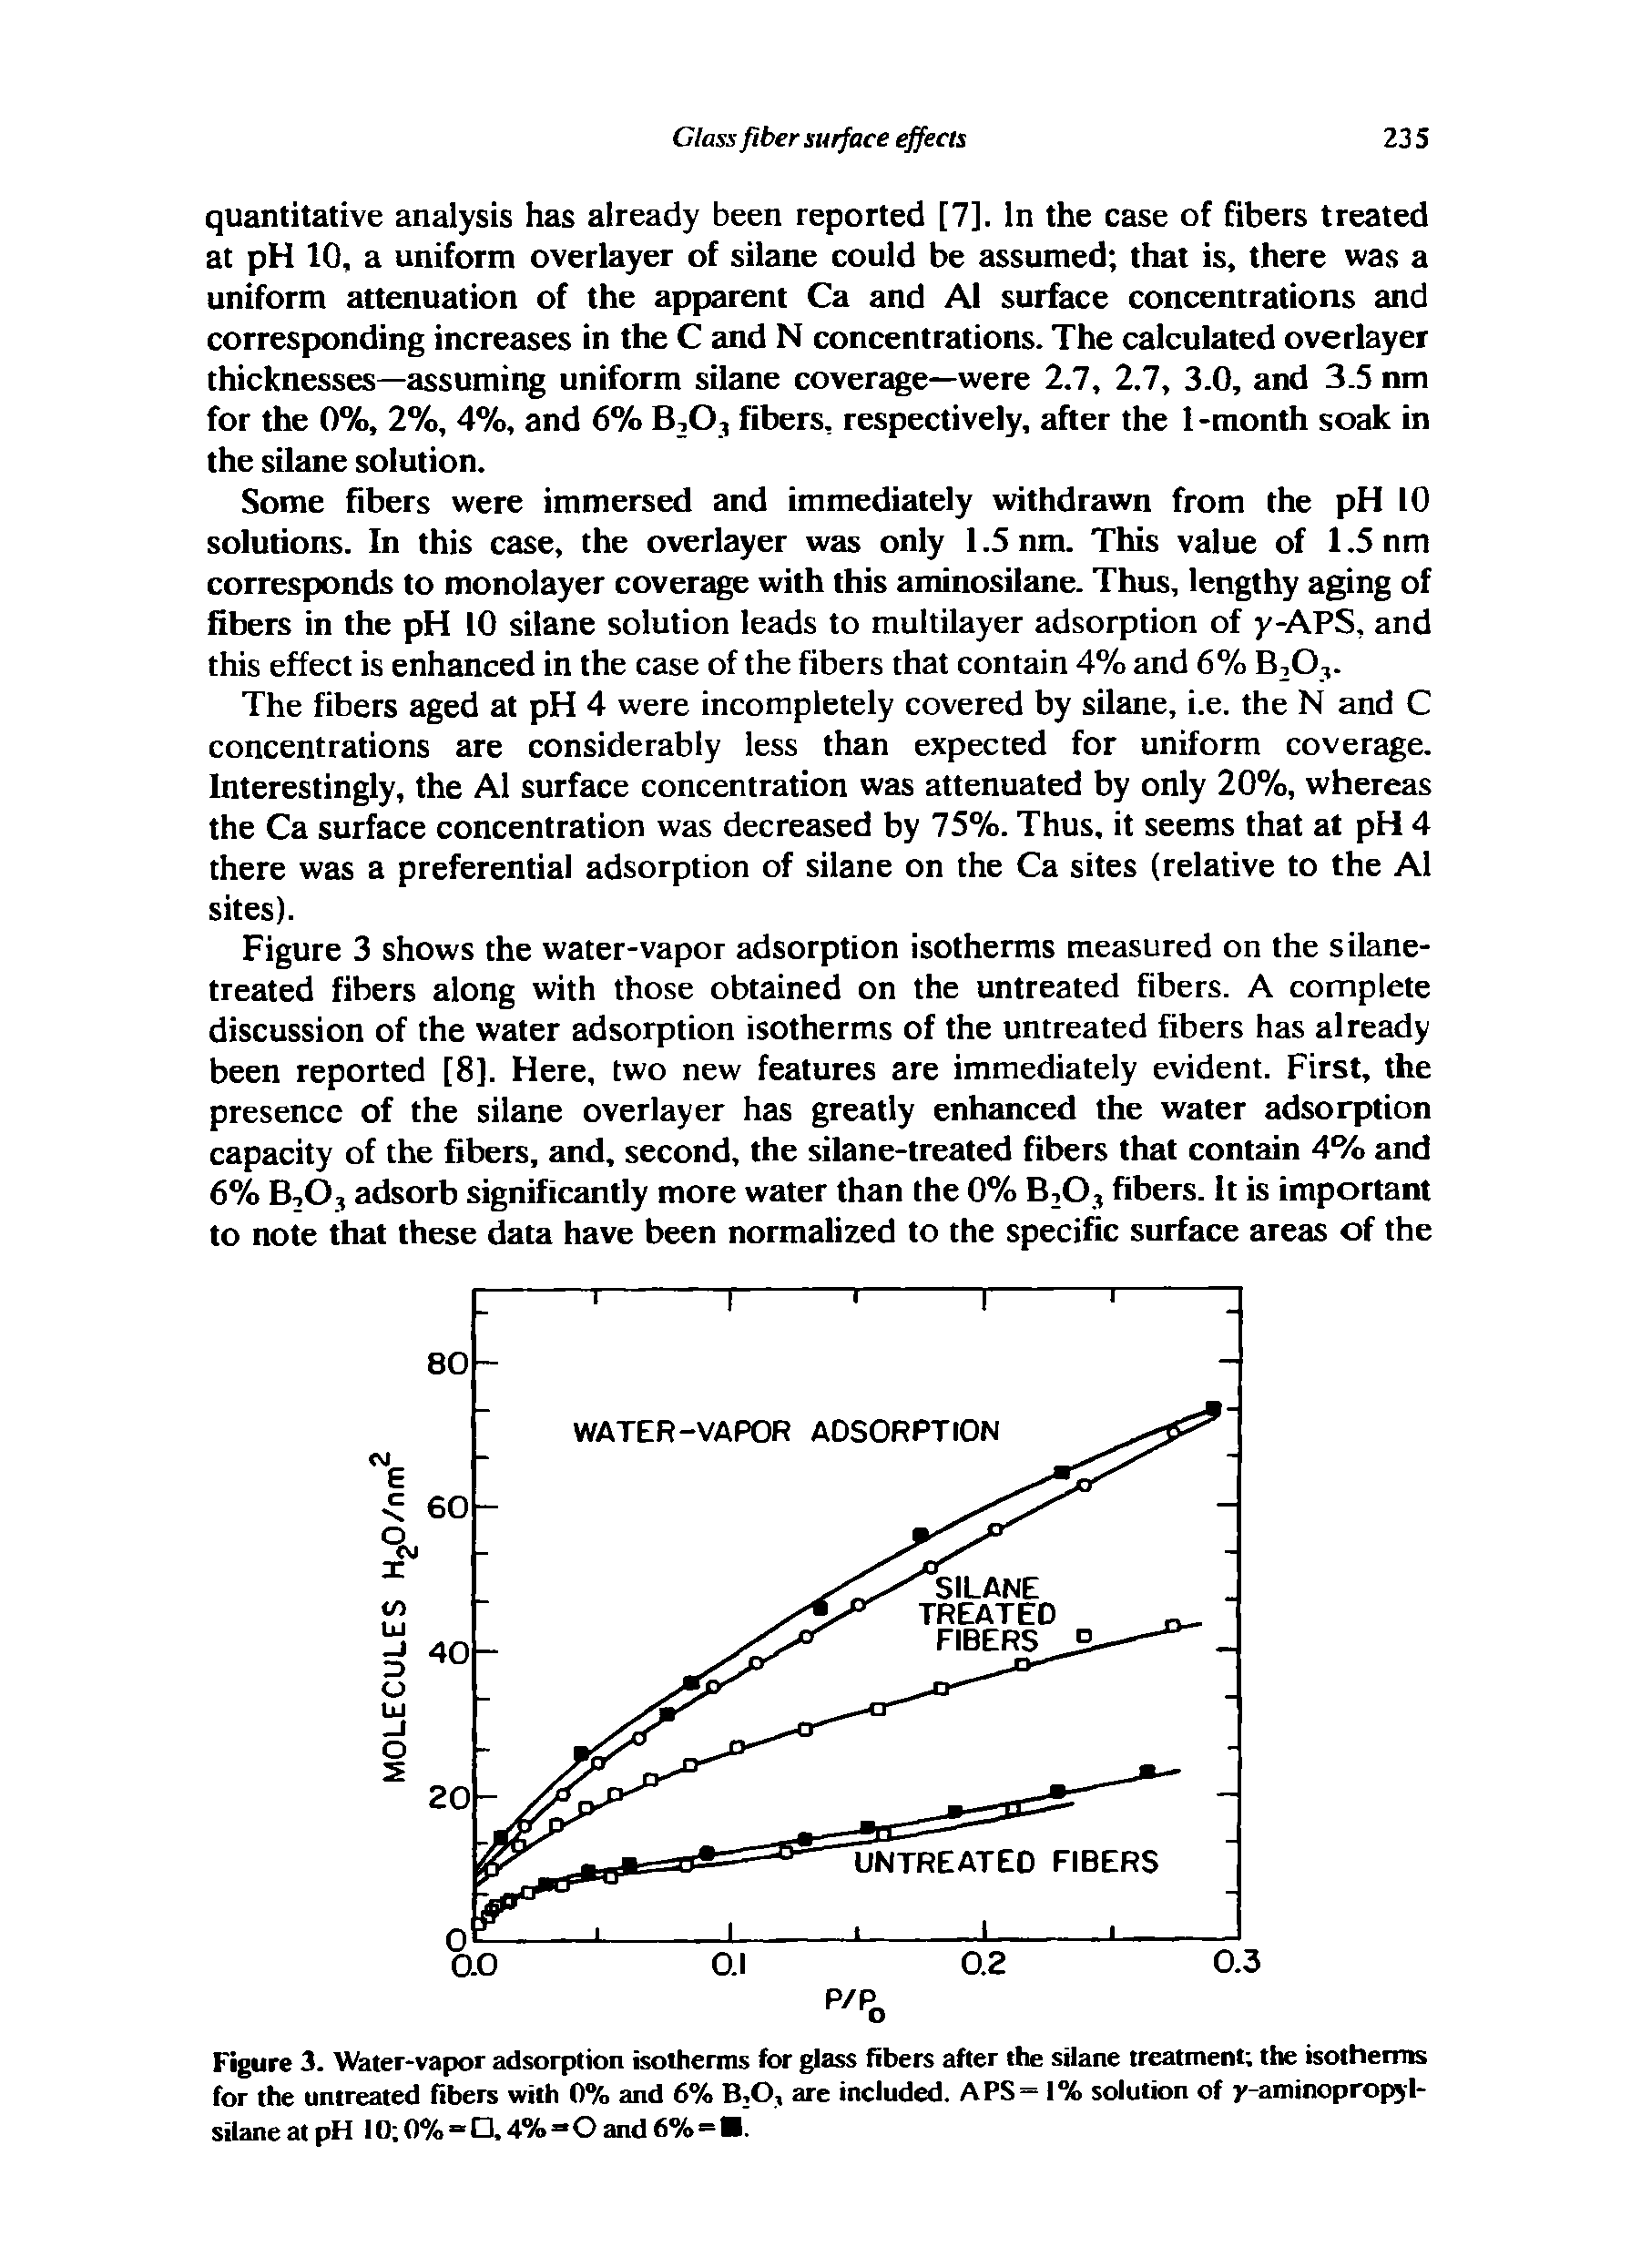 Figure 3. Water-vapor adsorption isotherms for glass fibers after the silane treatment the isotherms for the untreated fibers with 0% and 6% B,0, are included. APS - 1% solution of y-aminopropyl-silane at pH 10 0%—O,4% Oand6% B.